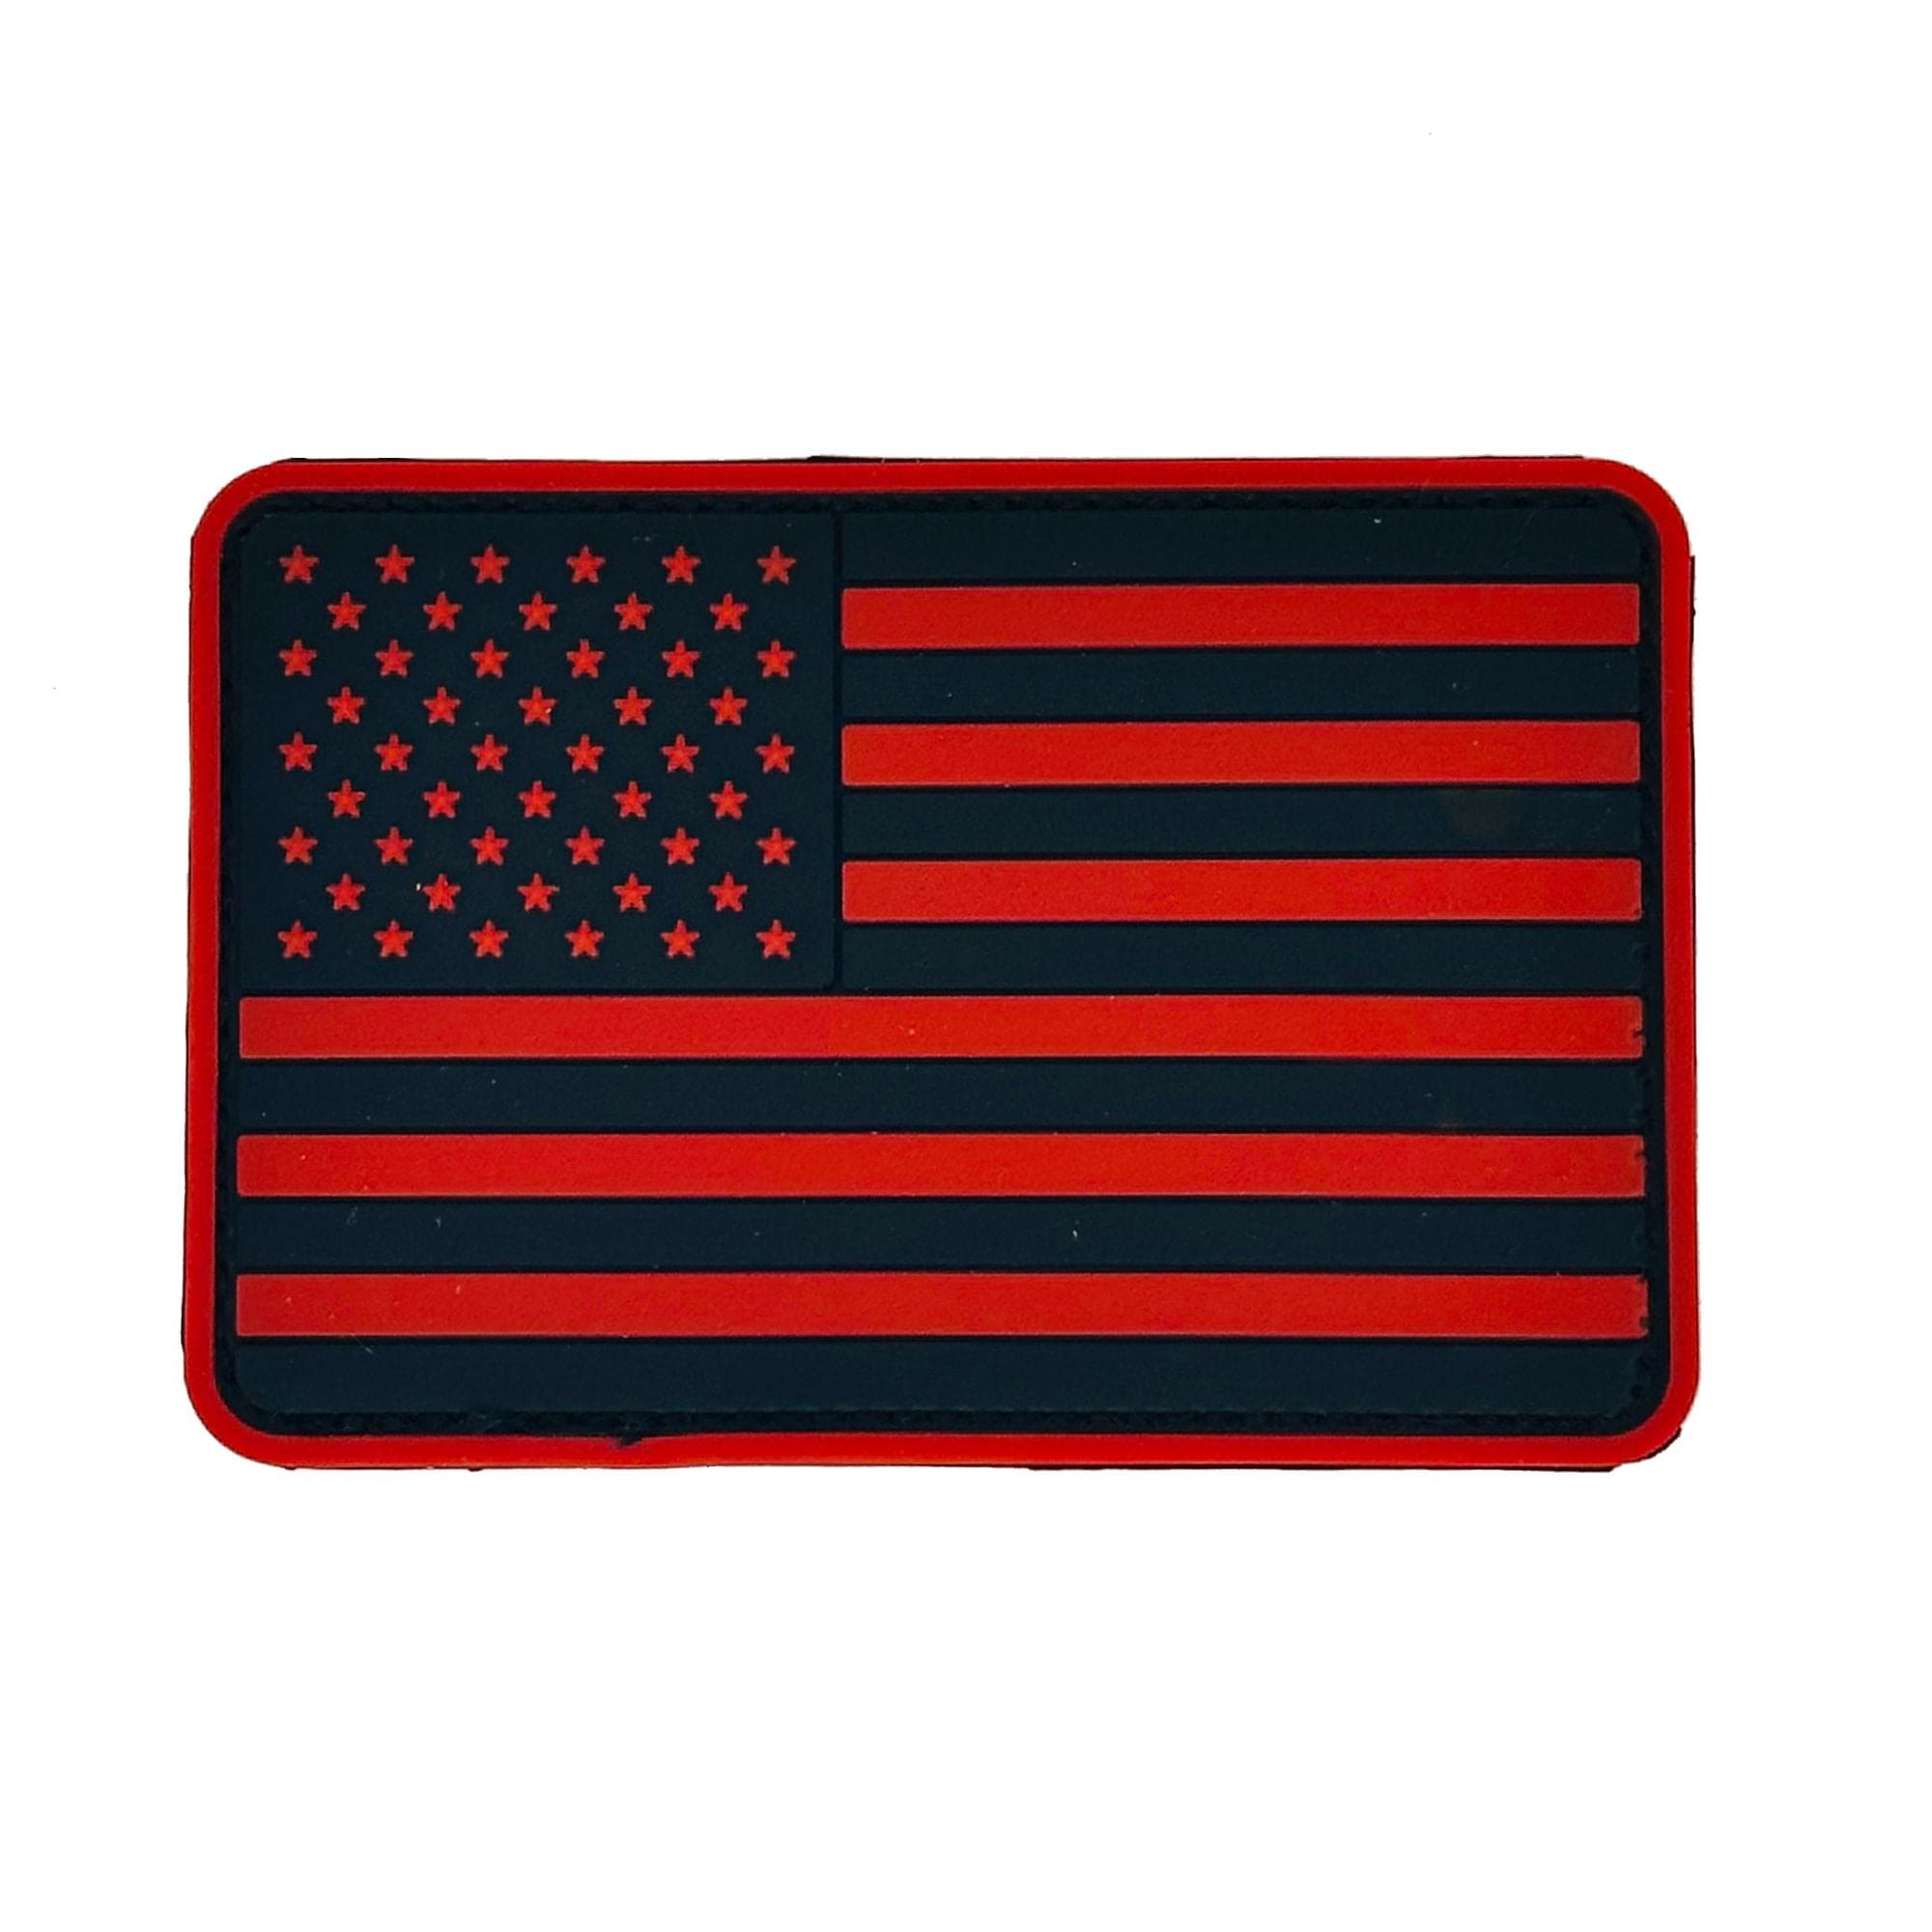 Tactical Gear Junkie Patches Red US Flag - Rounded Corners - 2"x3" PVC Patch (USA Made)